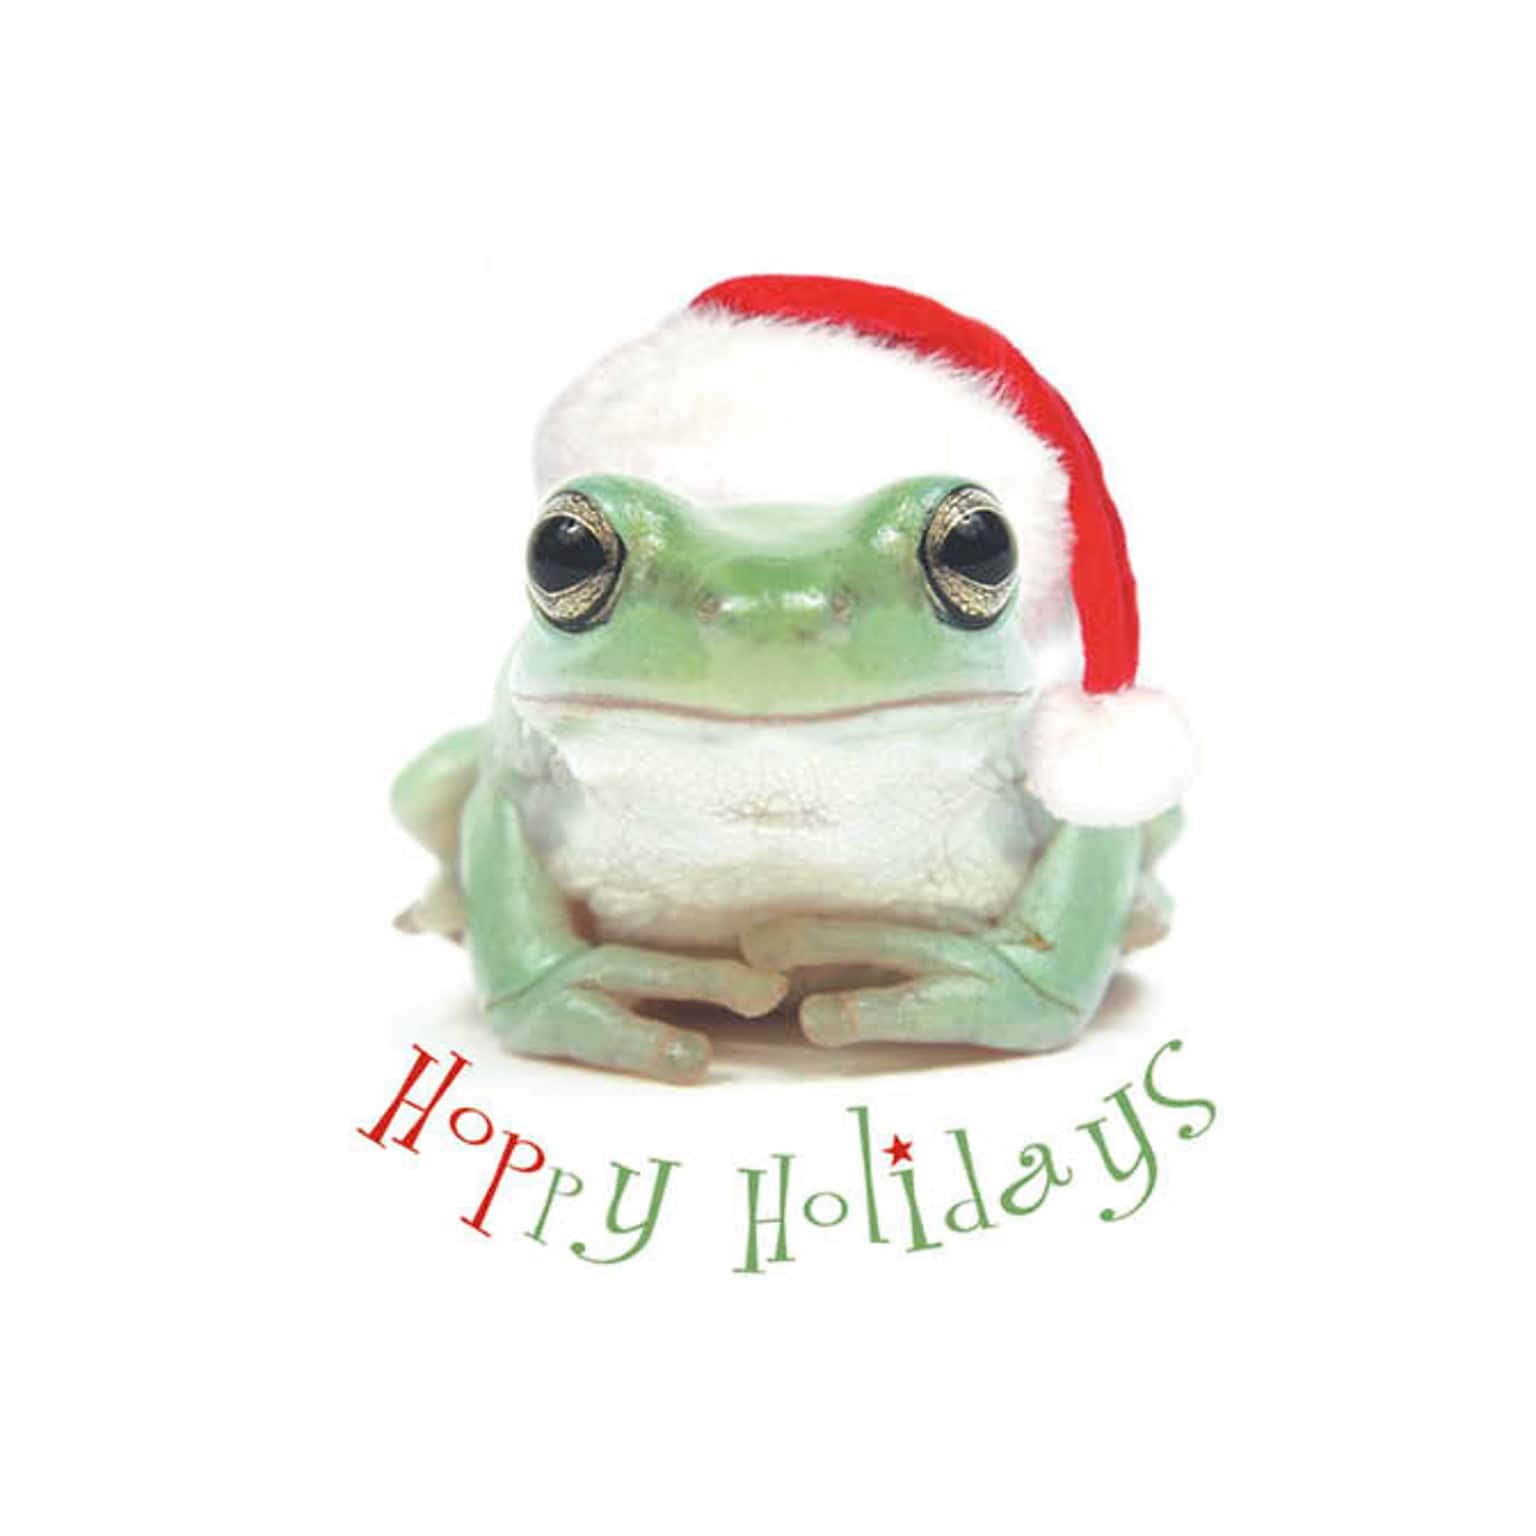 Hoppy Holidays Frog With Santa Hat Holiday Greeting Cards, With A7 Envelopes, 7 x 5, 25 Cards per Set